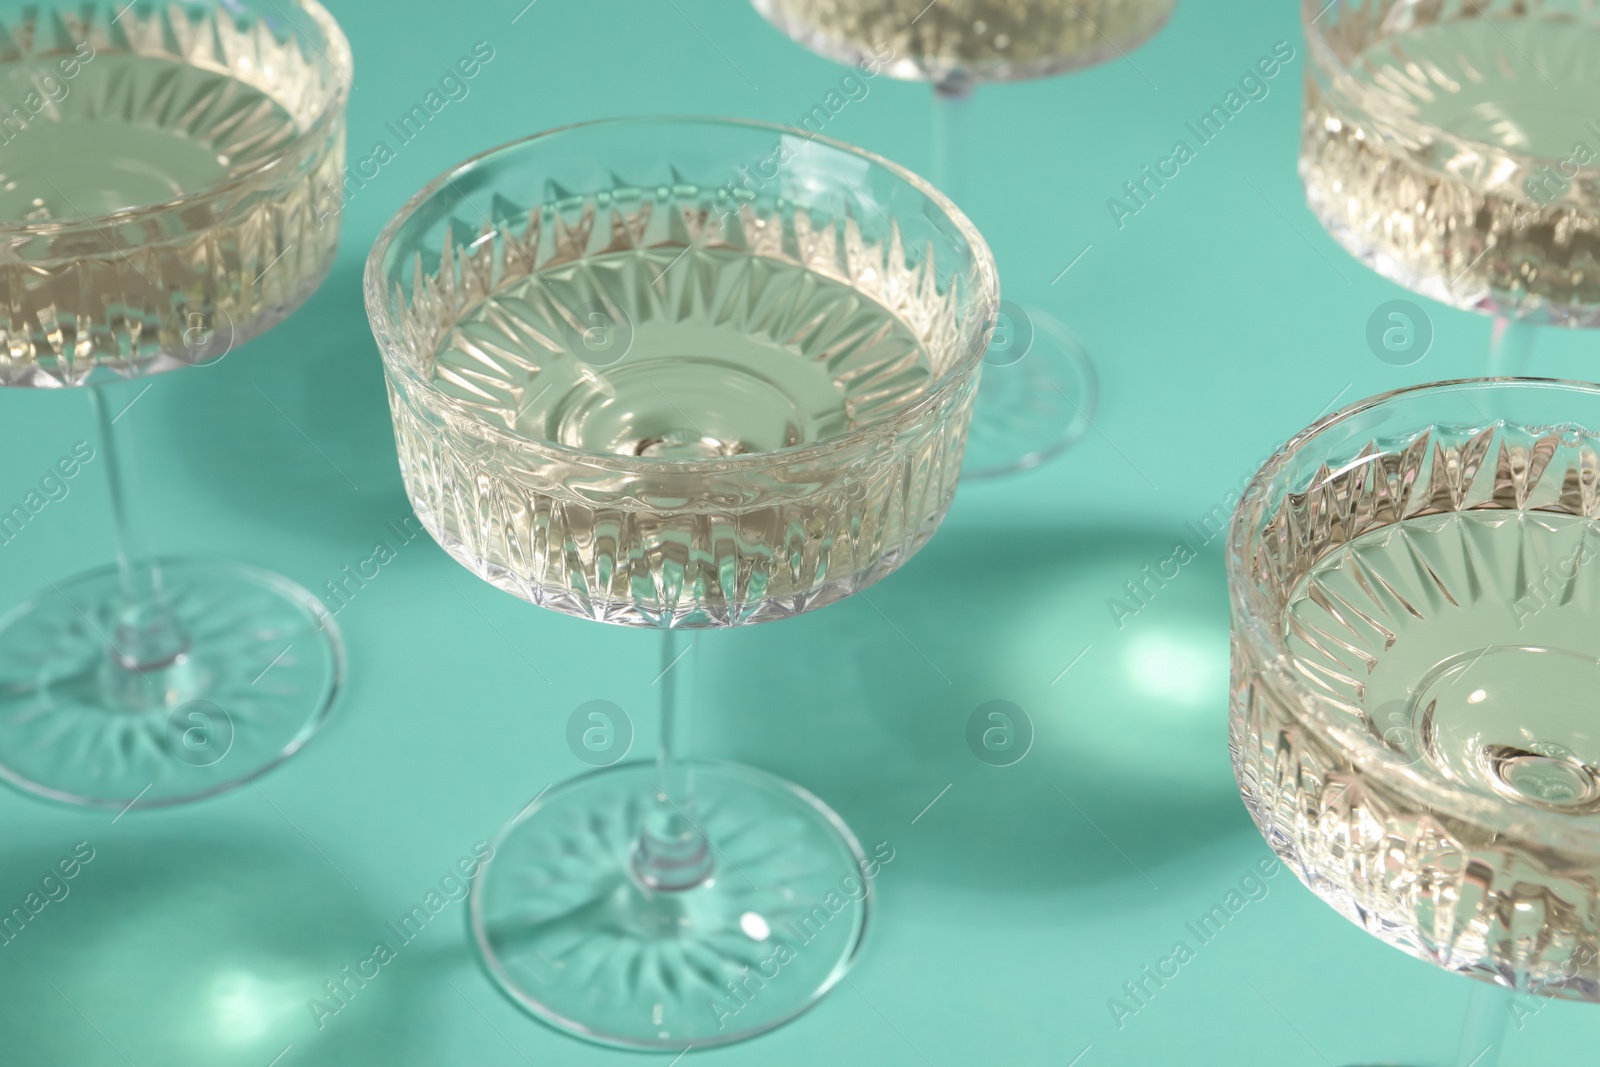 Photo of Glasses of expensive white wine on turquoise background